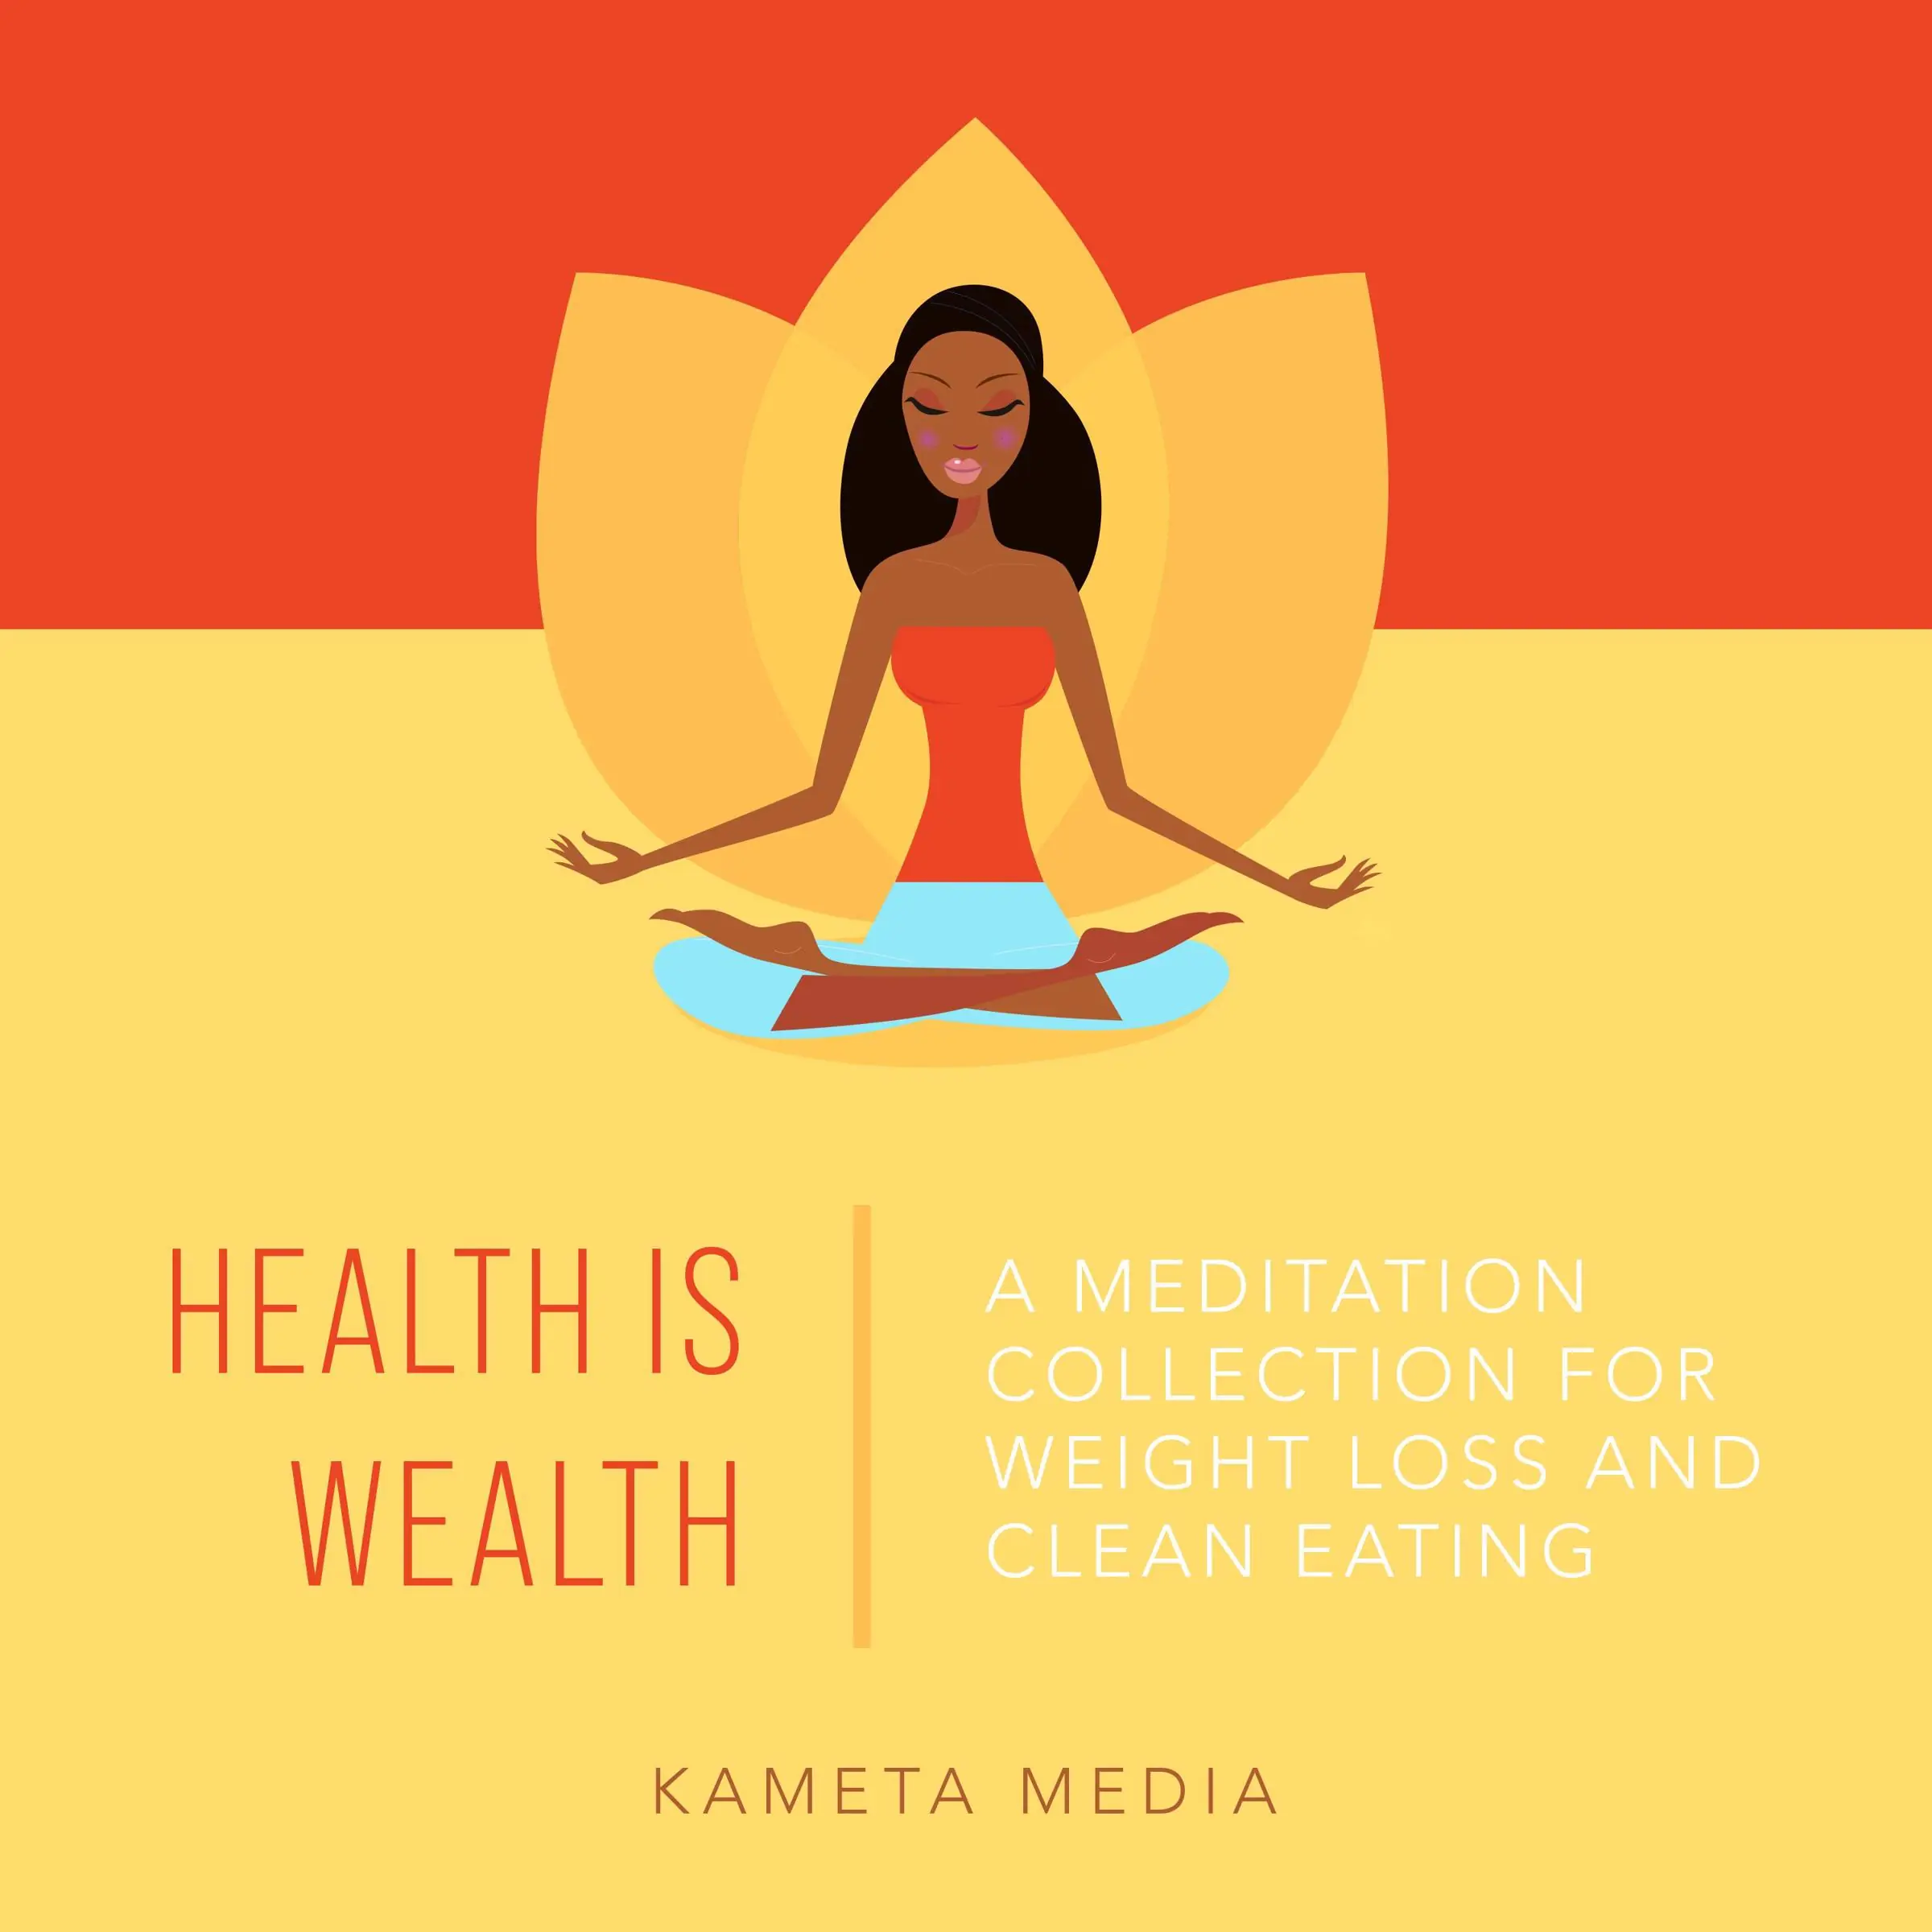 Health Is Wealth: A Meditation Collection for Weight Loss and Clean Eating by Kameta Media Audiobook